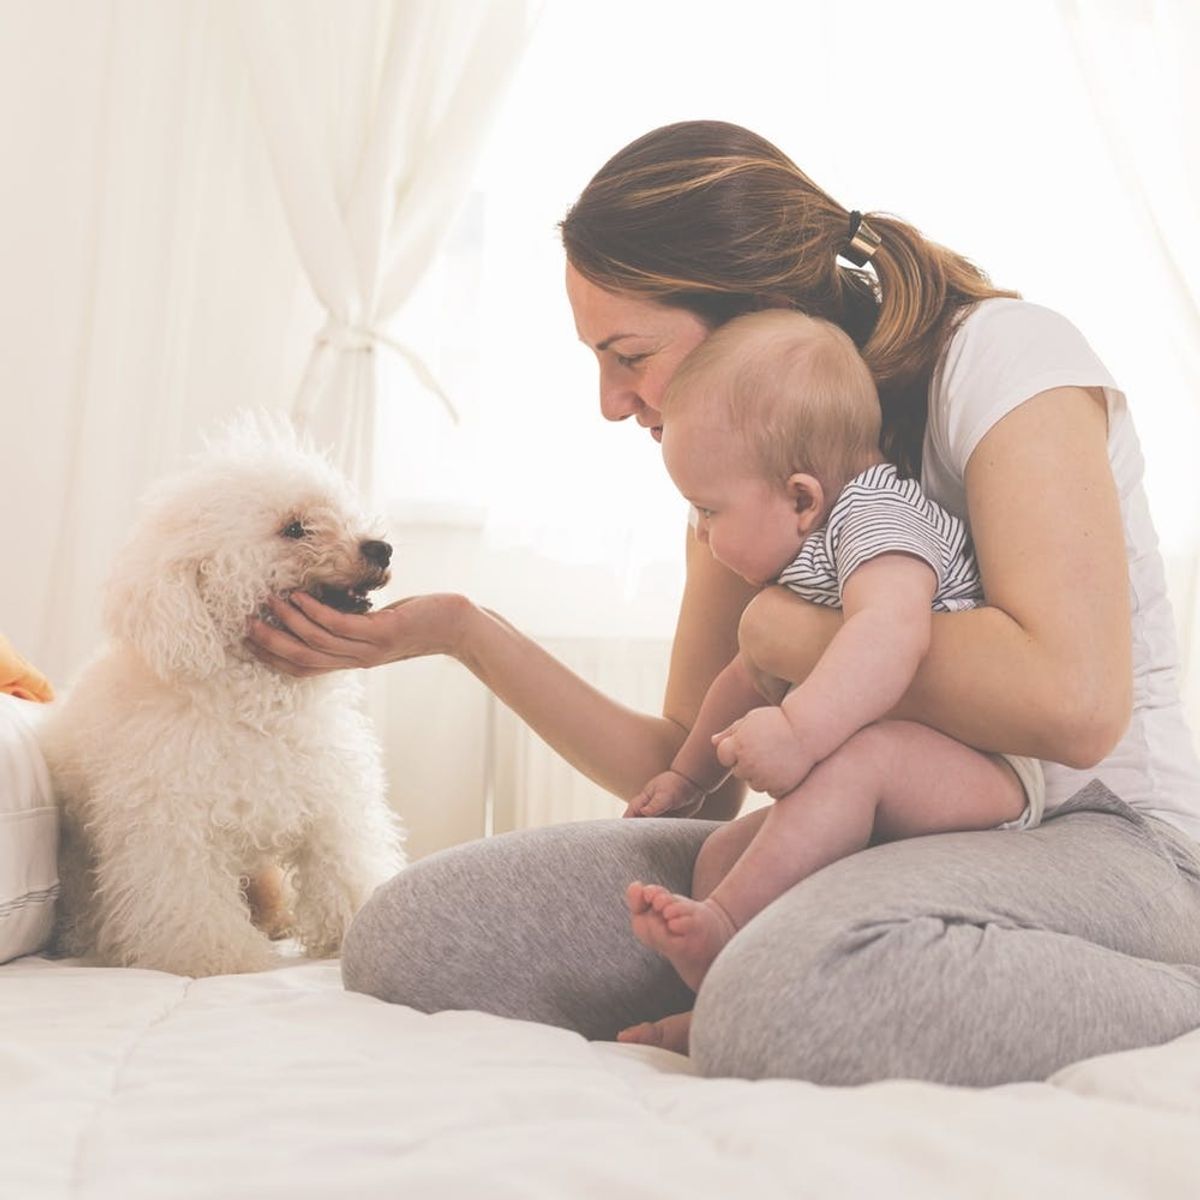 How to Prepare Your Dog for Your New Baby